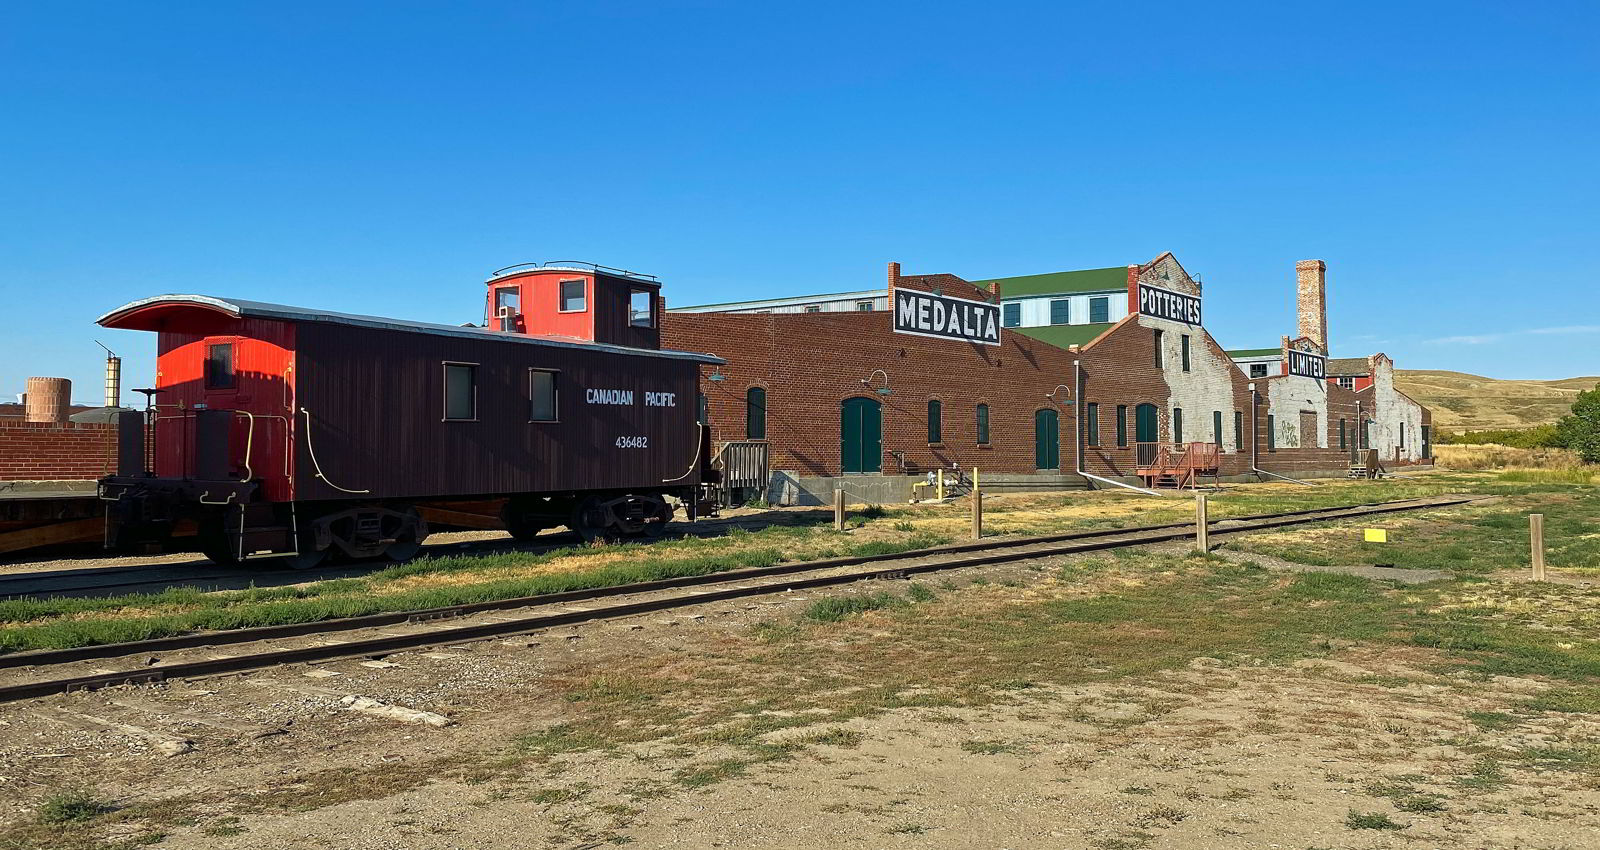 An image of the Medalta Potteries site in Medicine Hat, Alberta, Canada - Things to do in Medicine Hat.